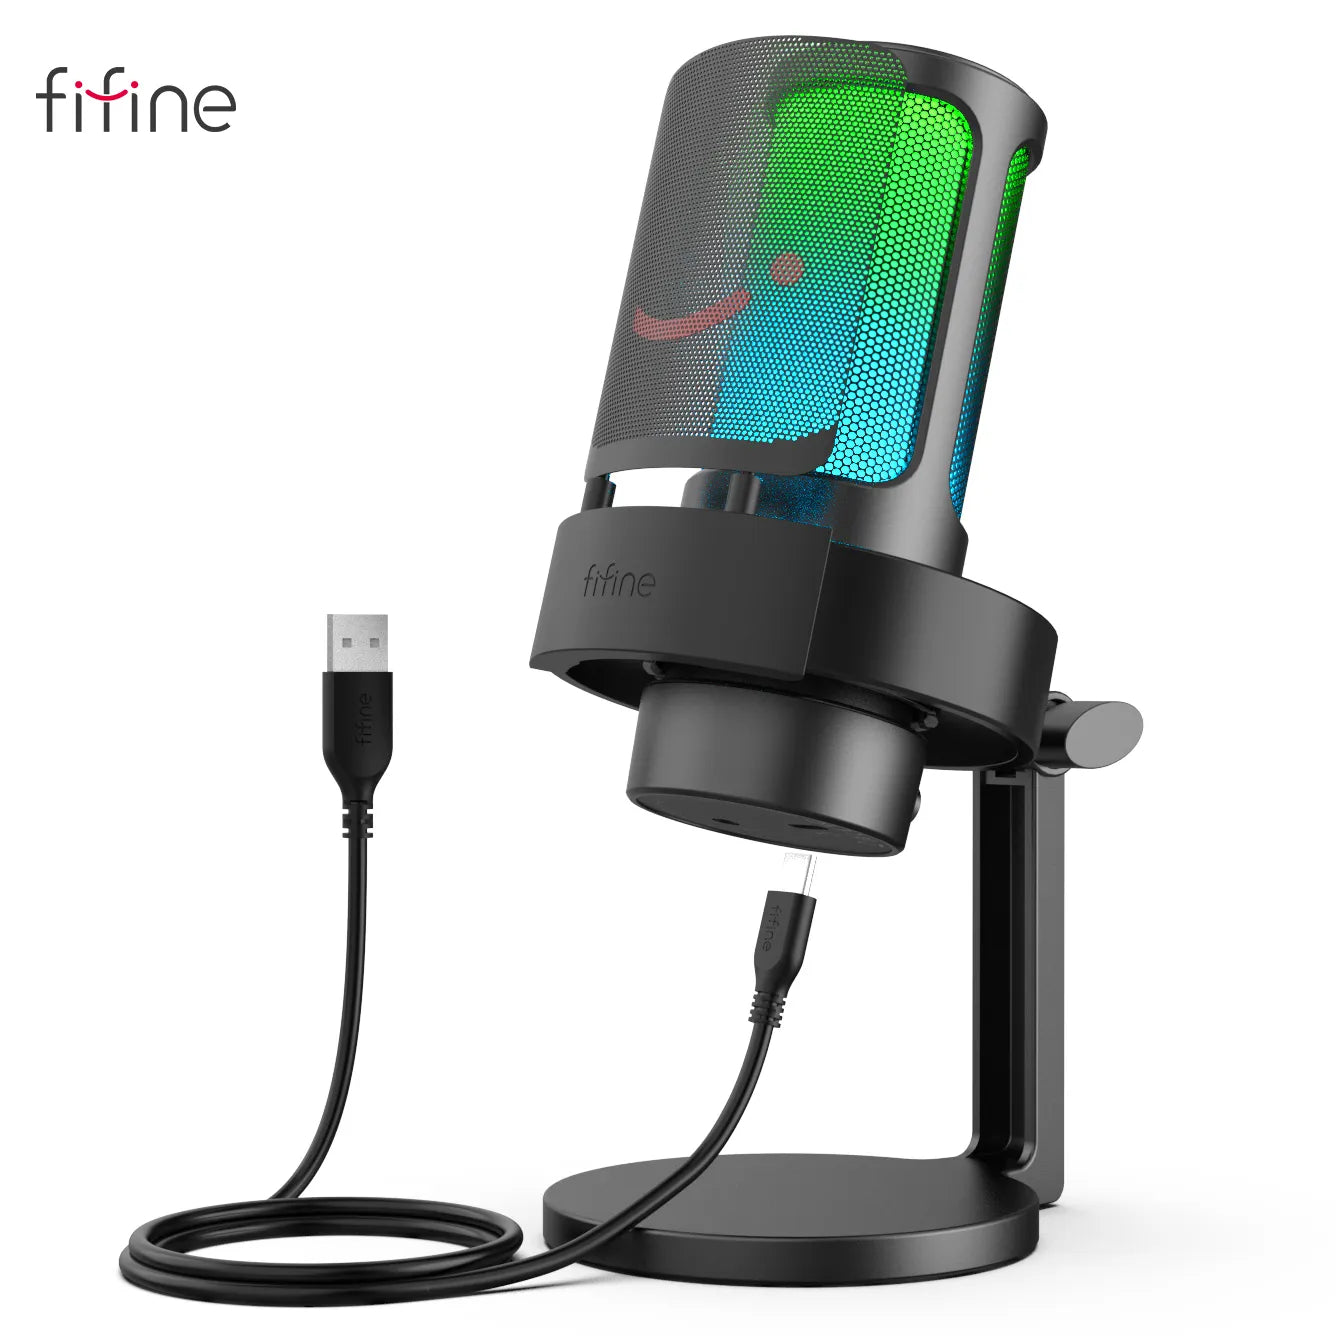 fifine-usb-microphone-for-recording-and-streaming-on-pc-and-mac-headphone-output-and-touch-mute-button-mic-with-3-rgb-modes-a8